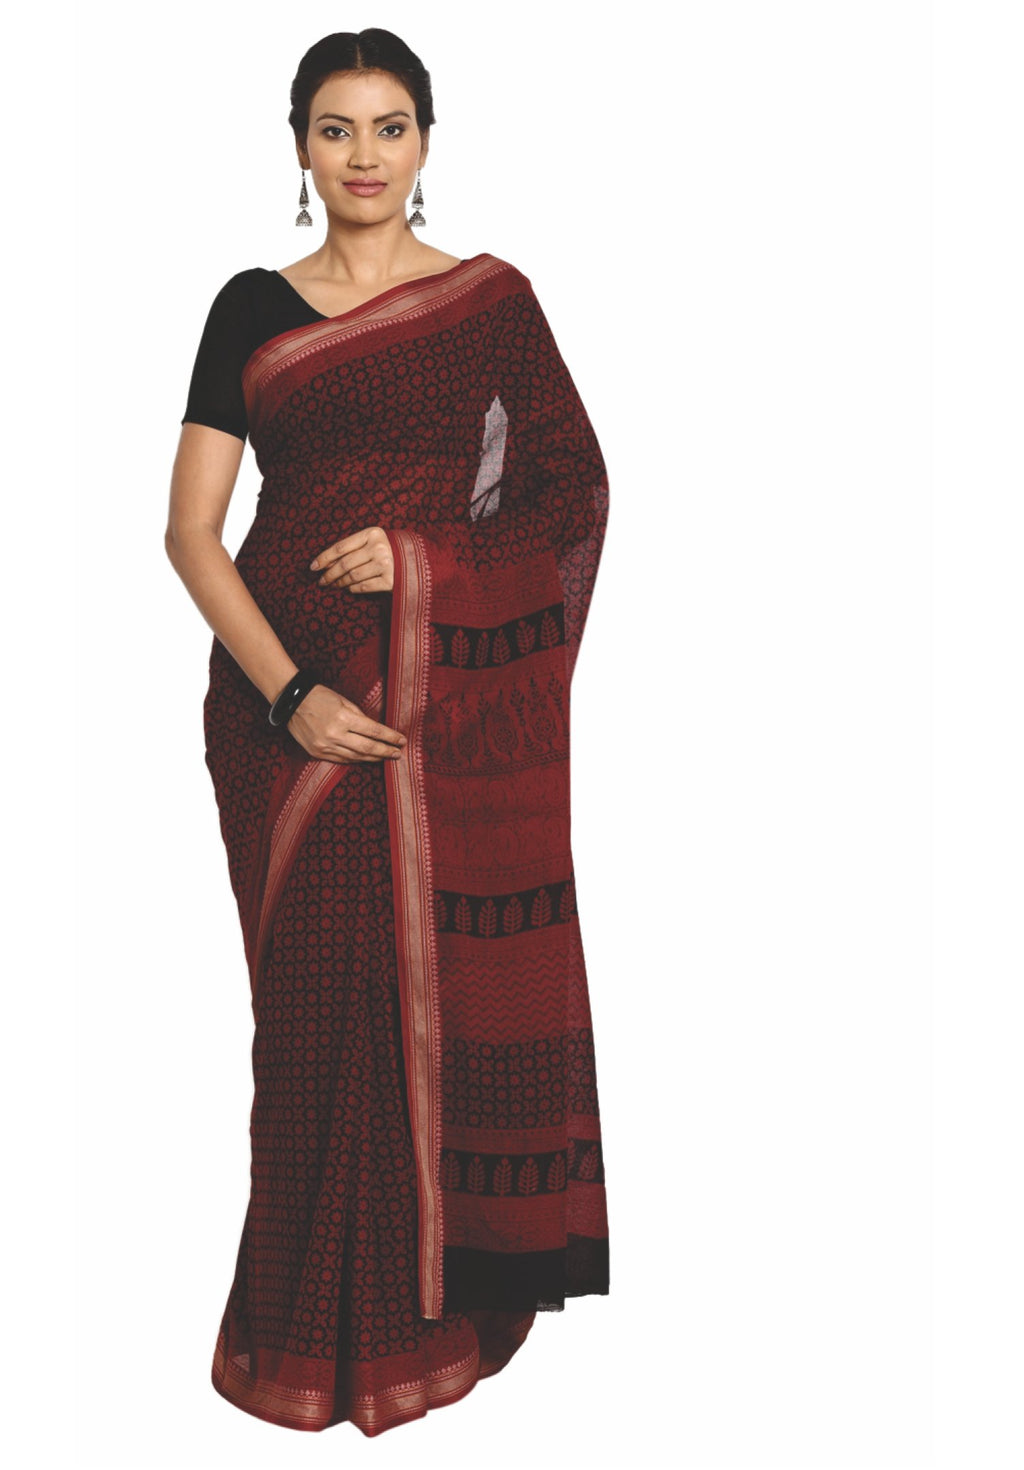 Maroon Cotton Hand Block Bagh Print Handcrafted Saree-Saree-Kalakari India-ZIBASA0066-Bagh, Cotton, Geographical Indication, Hand Blocks, Hand Crafted, Heritage Prints, Natural Dyes, Sarees, Sustainable Fabrics-[Linen,Ethnic,wear,Fashionista,Handloom,Handicraft,Indigo,blockprint,block,print,Cotton,Chanderi,Blue, latest,classy,party,bollywood,trendy,summer,style,traditional,formal,elegant,unique,style,hand,block,print, dabu,booti,gift,present,glamorous,affordable,collectible,Sari,Saree,printed, h